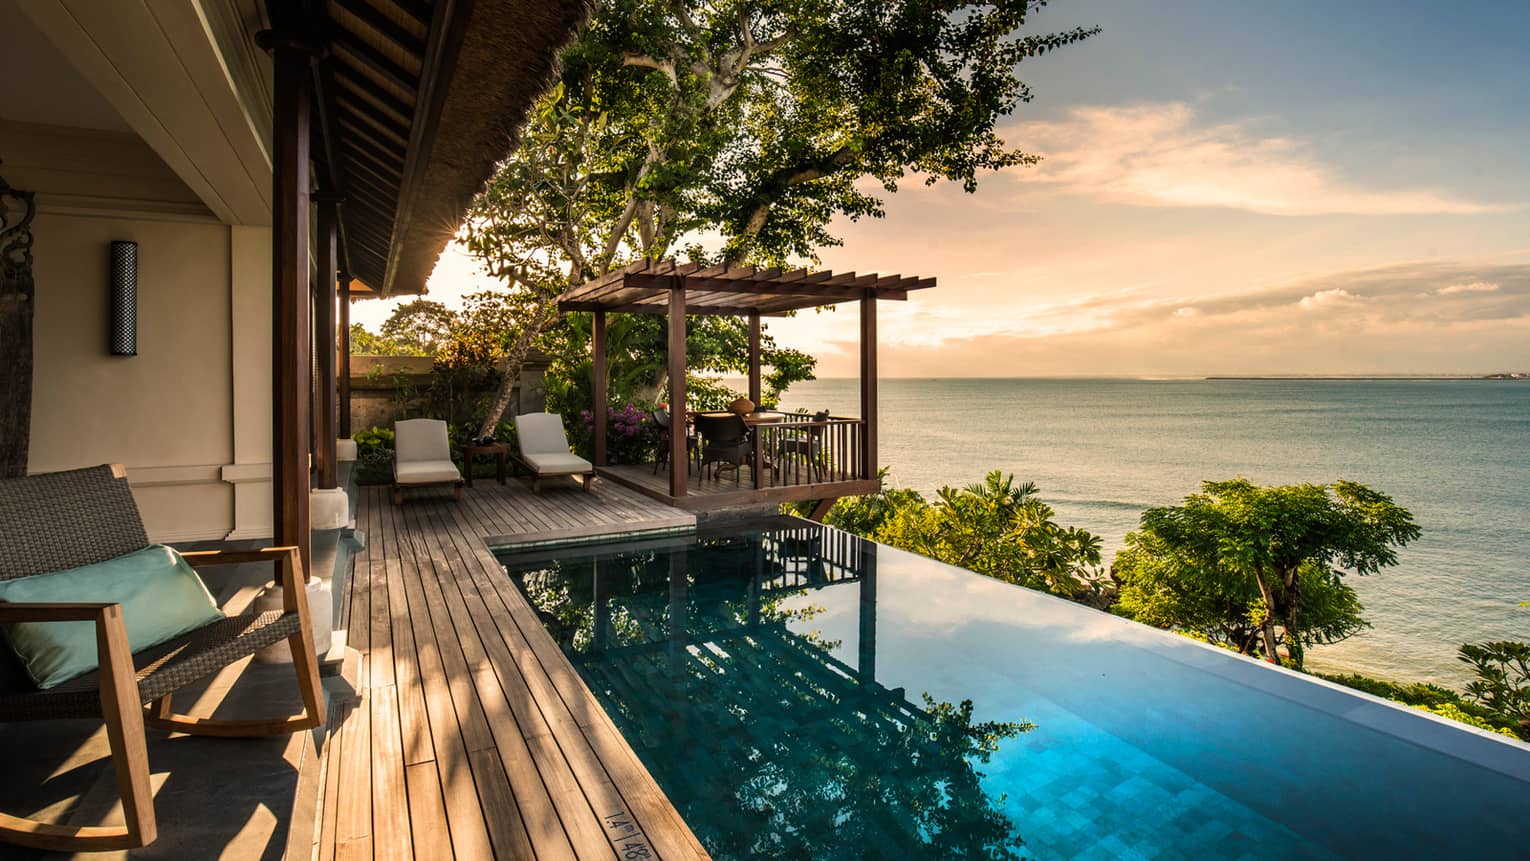 Private Ocean Villa patio at sunset with infinity swimming pool reflecting trees, clouds, white lounge chairs on side